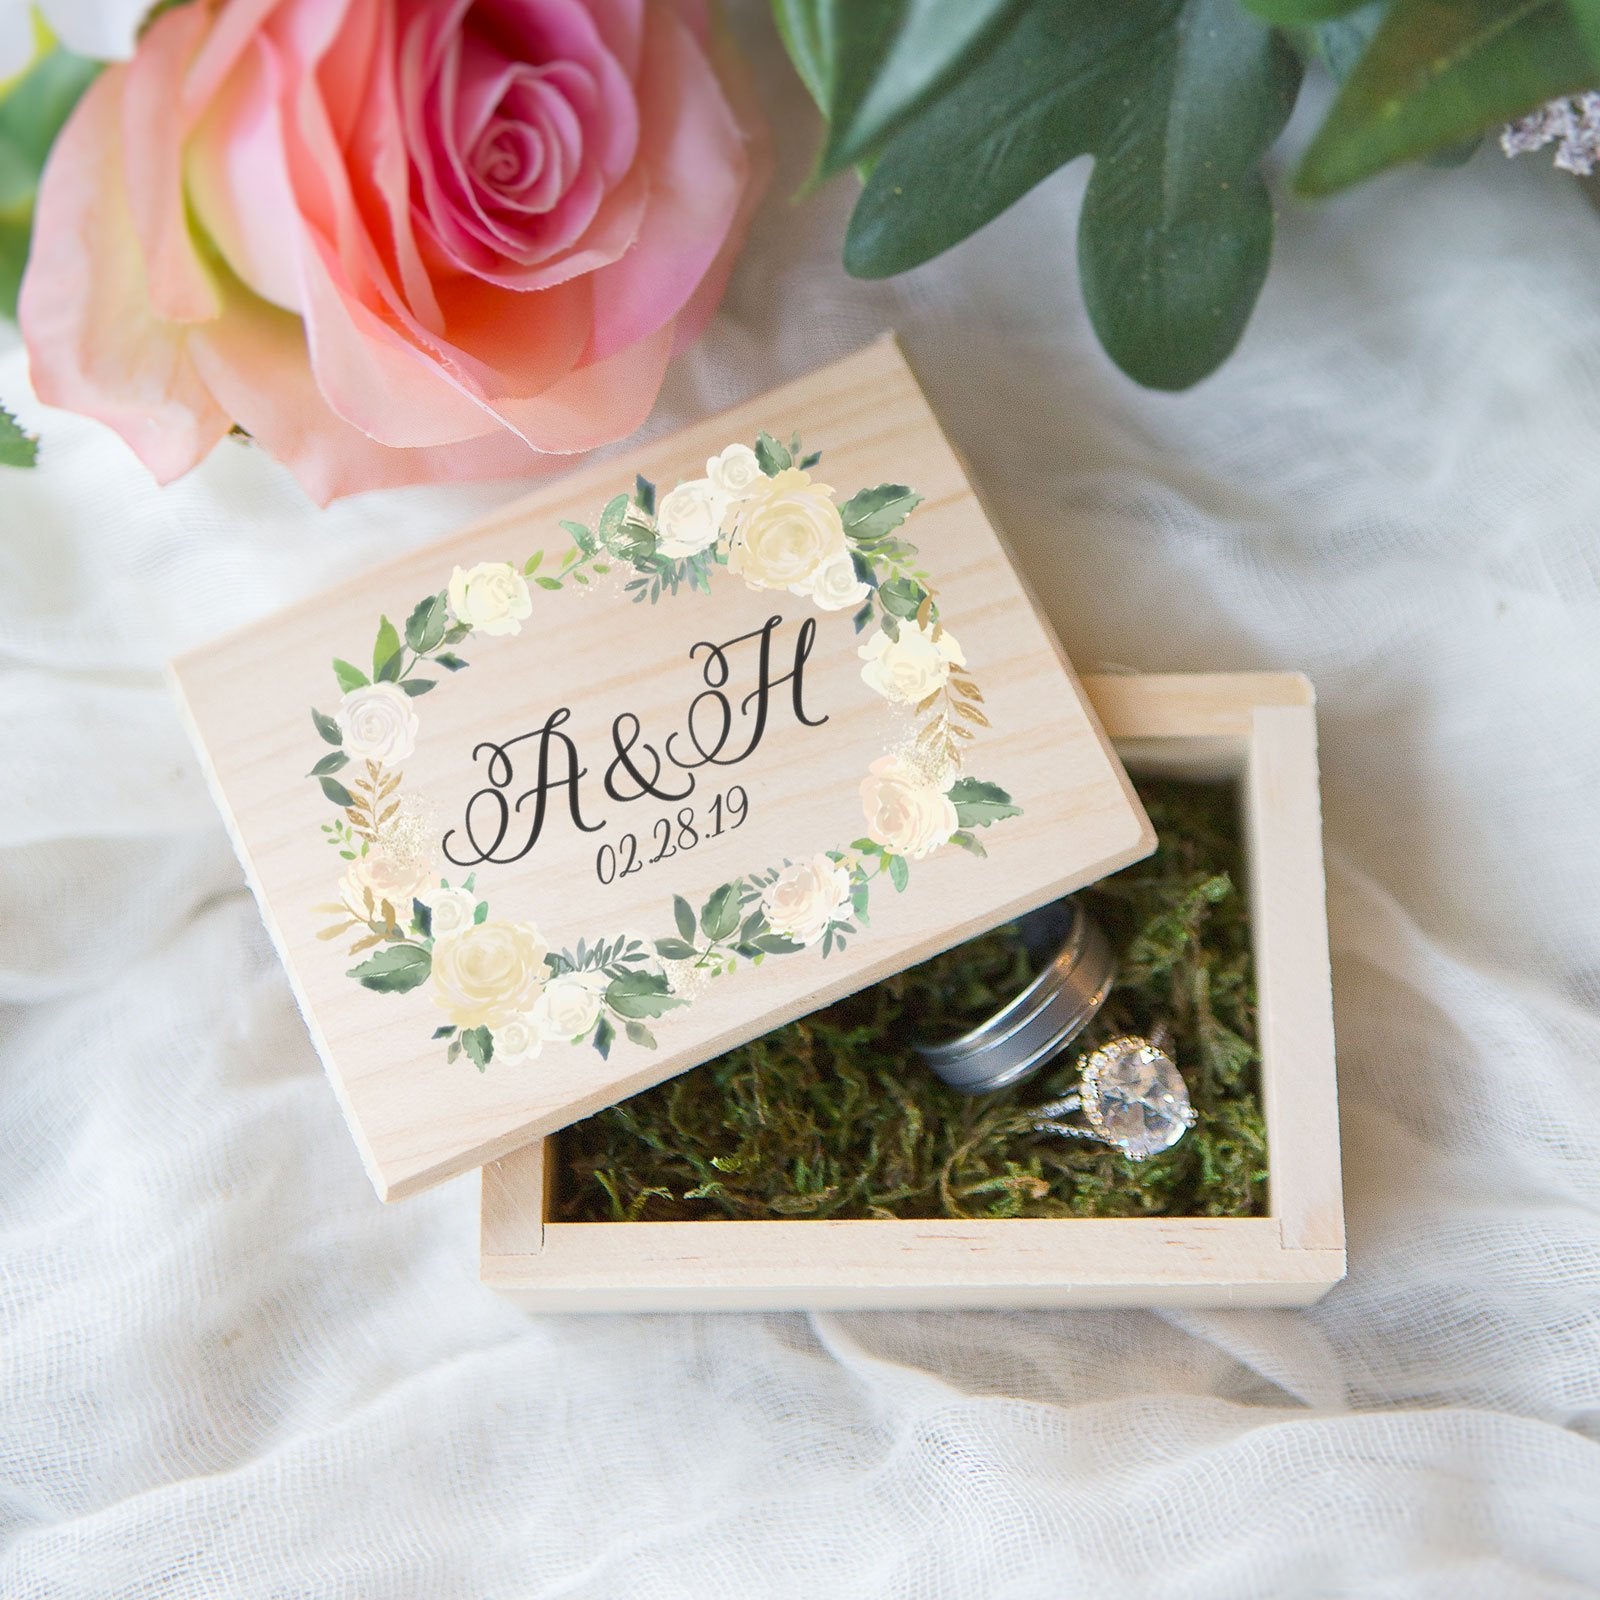 Personalized Floral Wedding Ring Box - Wedding Decor Gifts